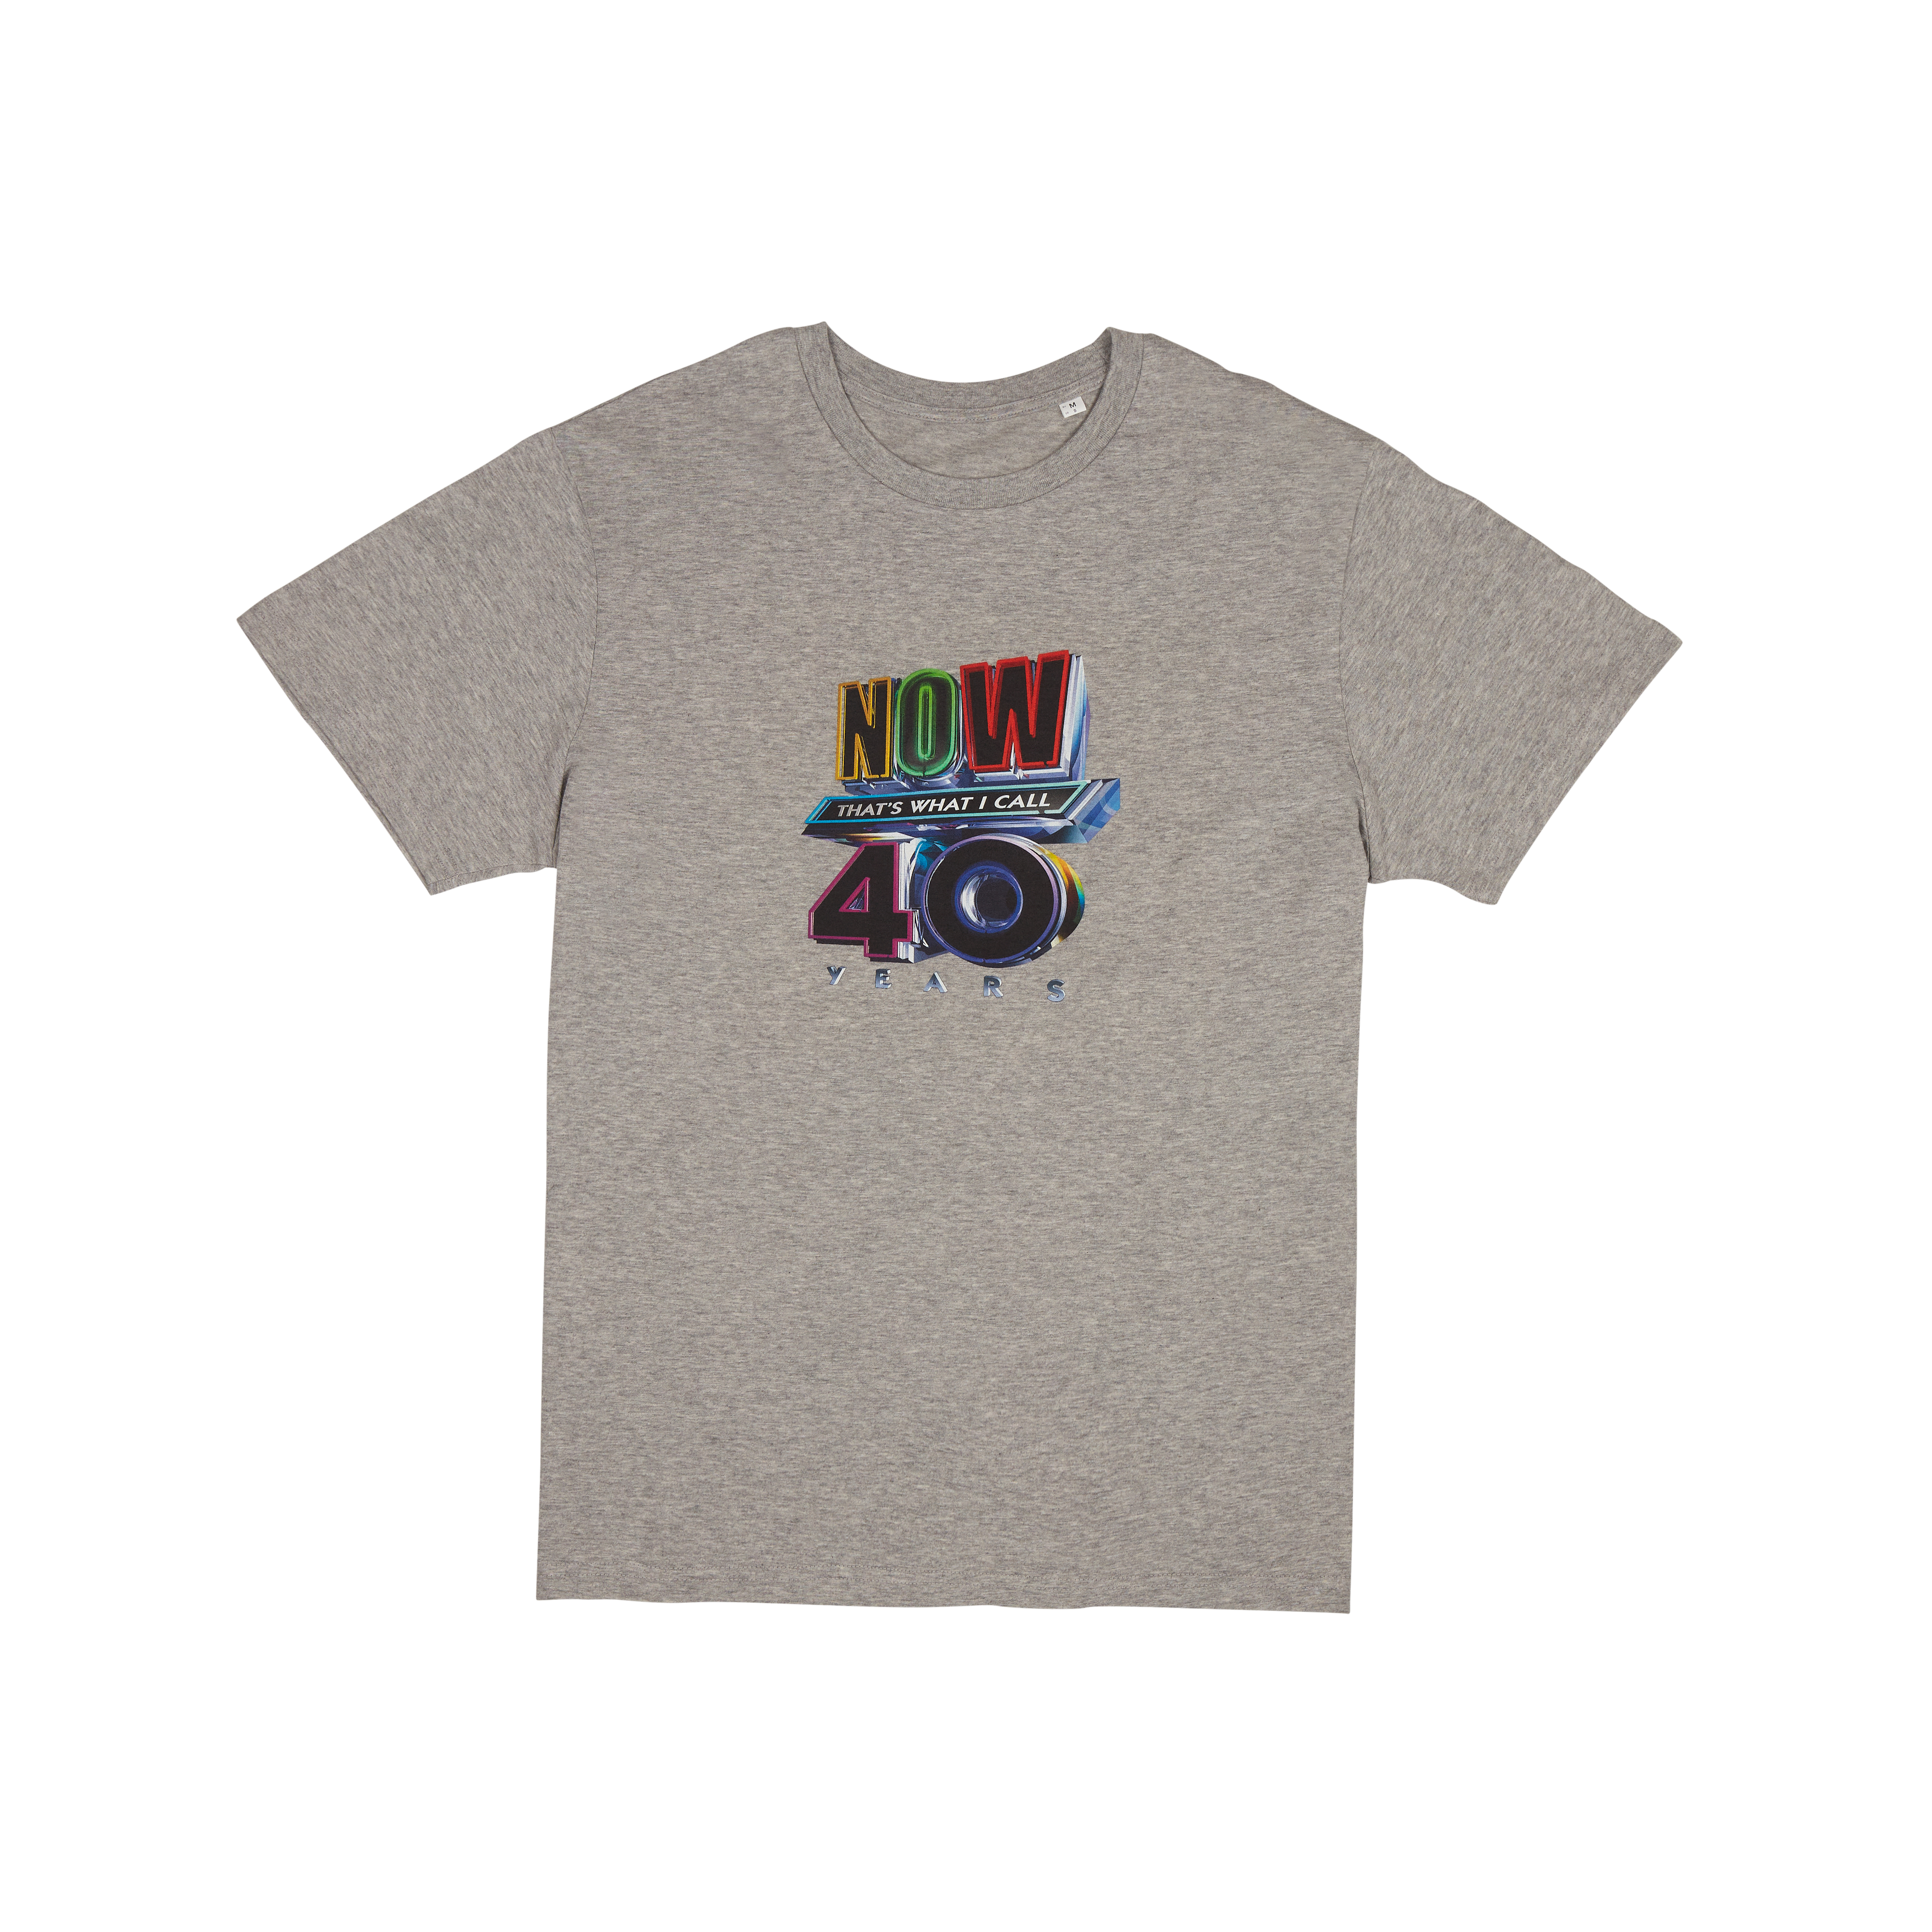 Now Music - NOW 40th Anniversary T-shirt Grey